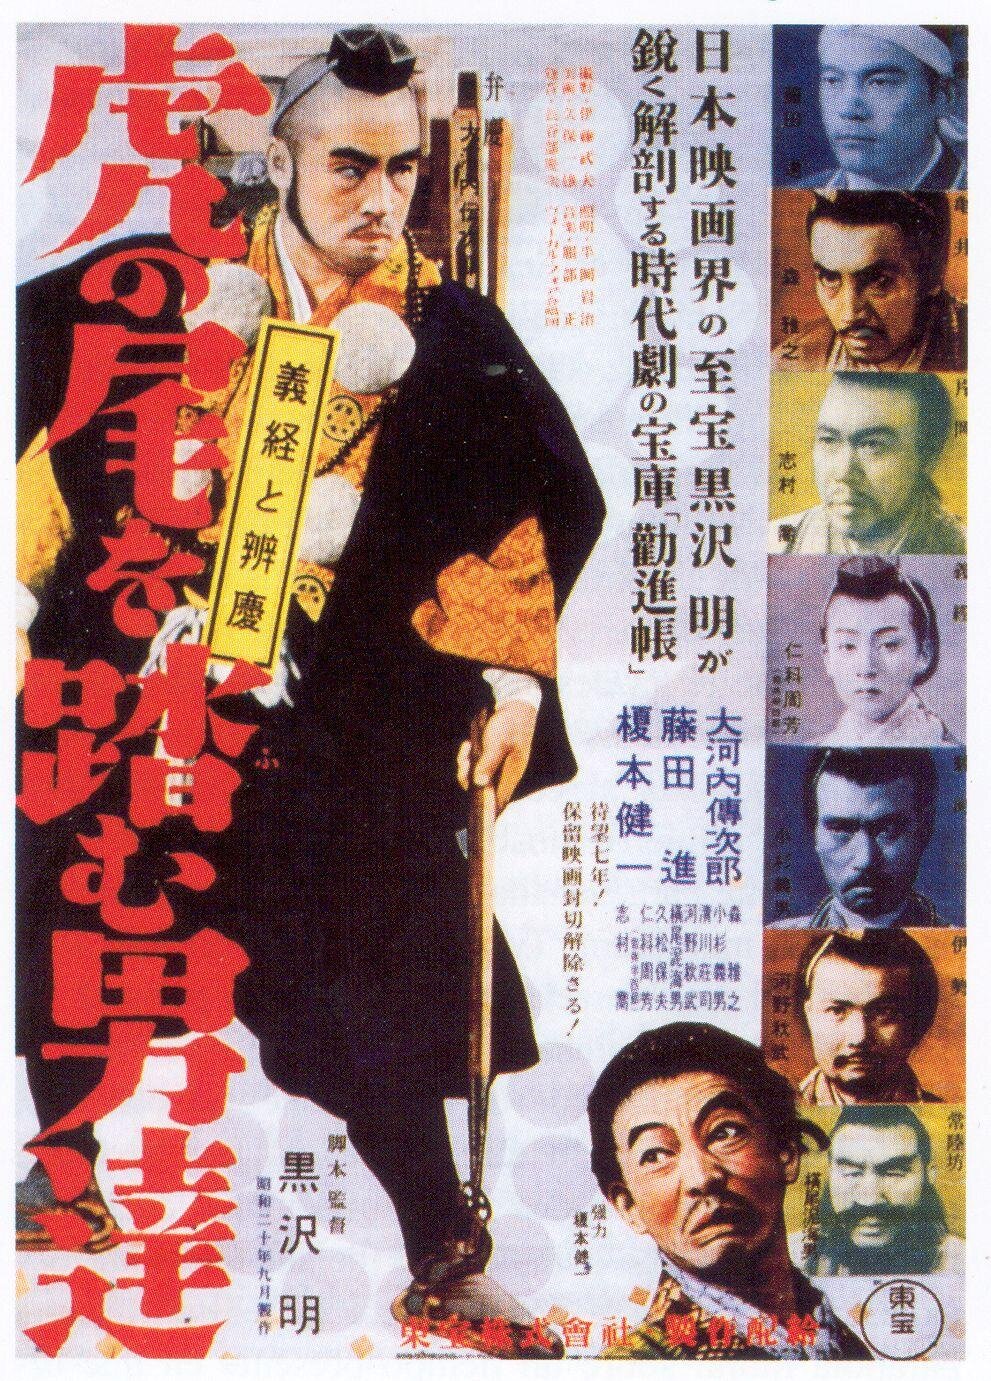 The Men Who Tread On The Tiger's Tail Poster.jpg